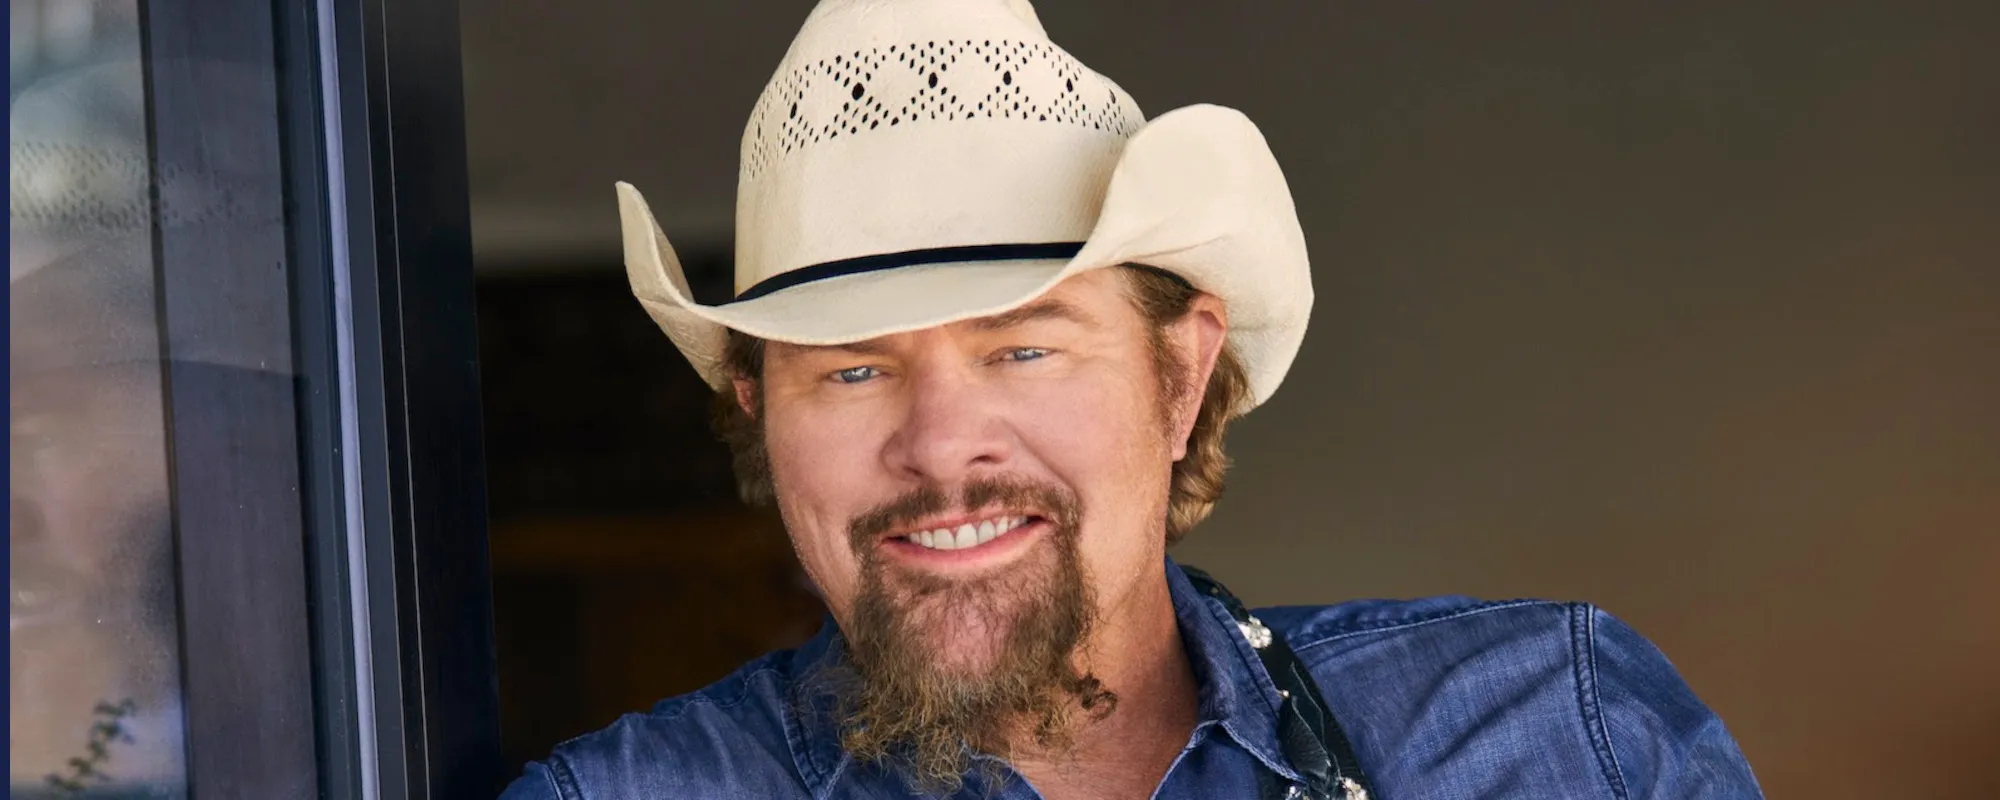 Toby Keith Shares New 4th of July Playlist, “Happy Birthday America”